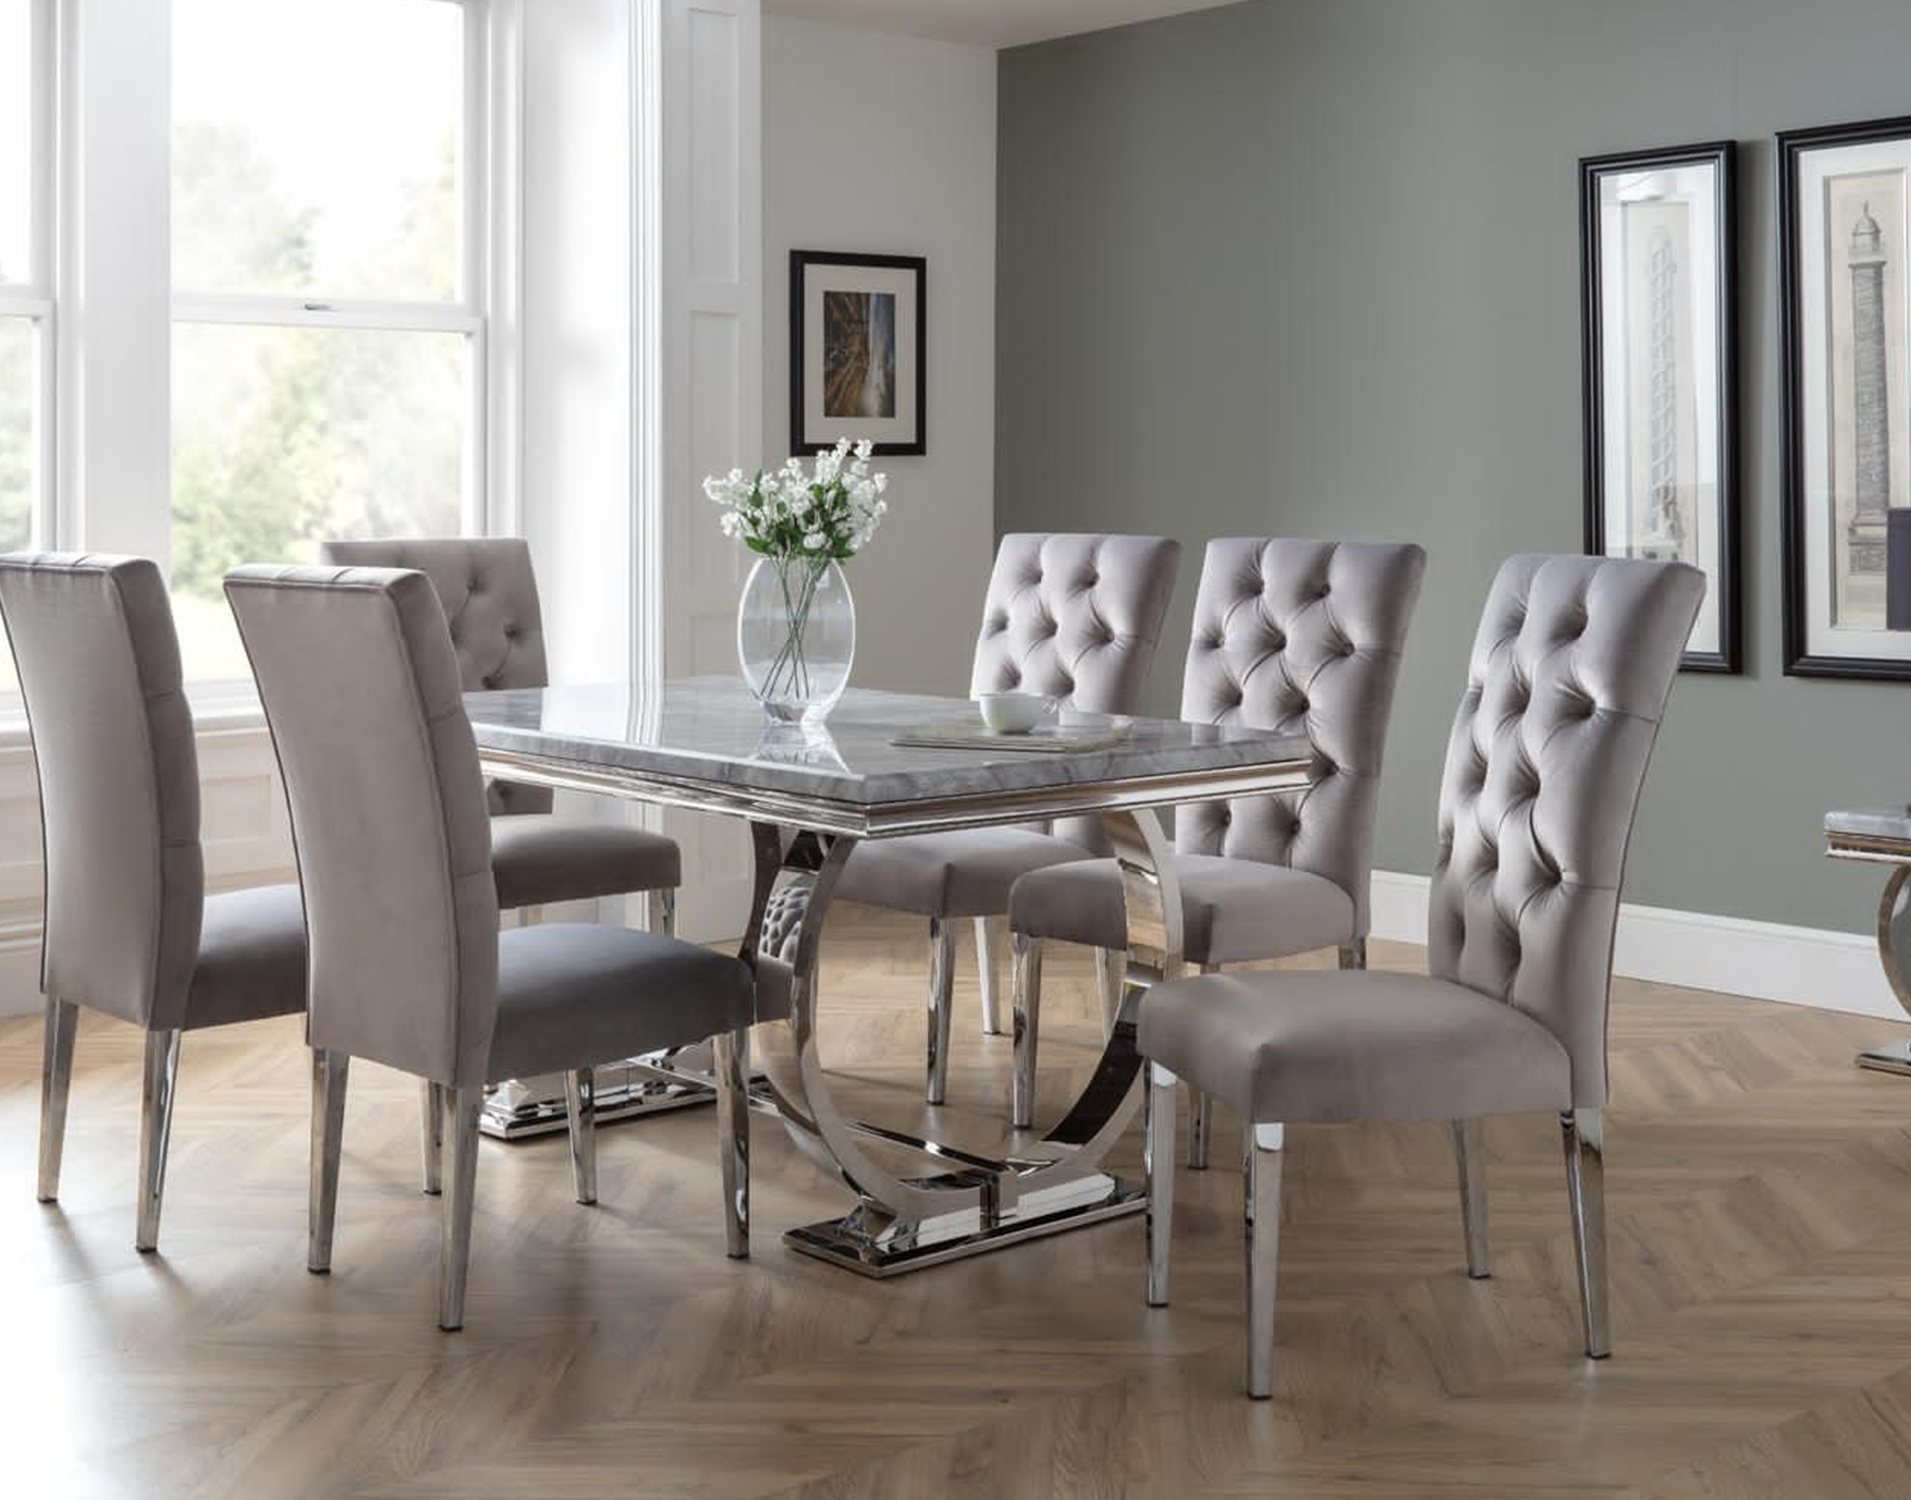 Crystal Chairs For Dining Room Table